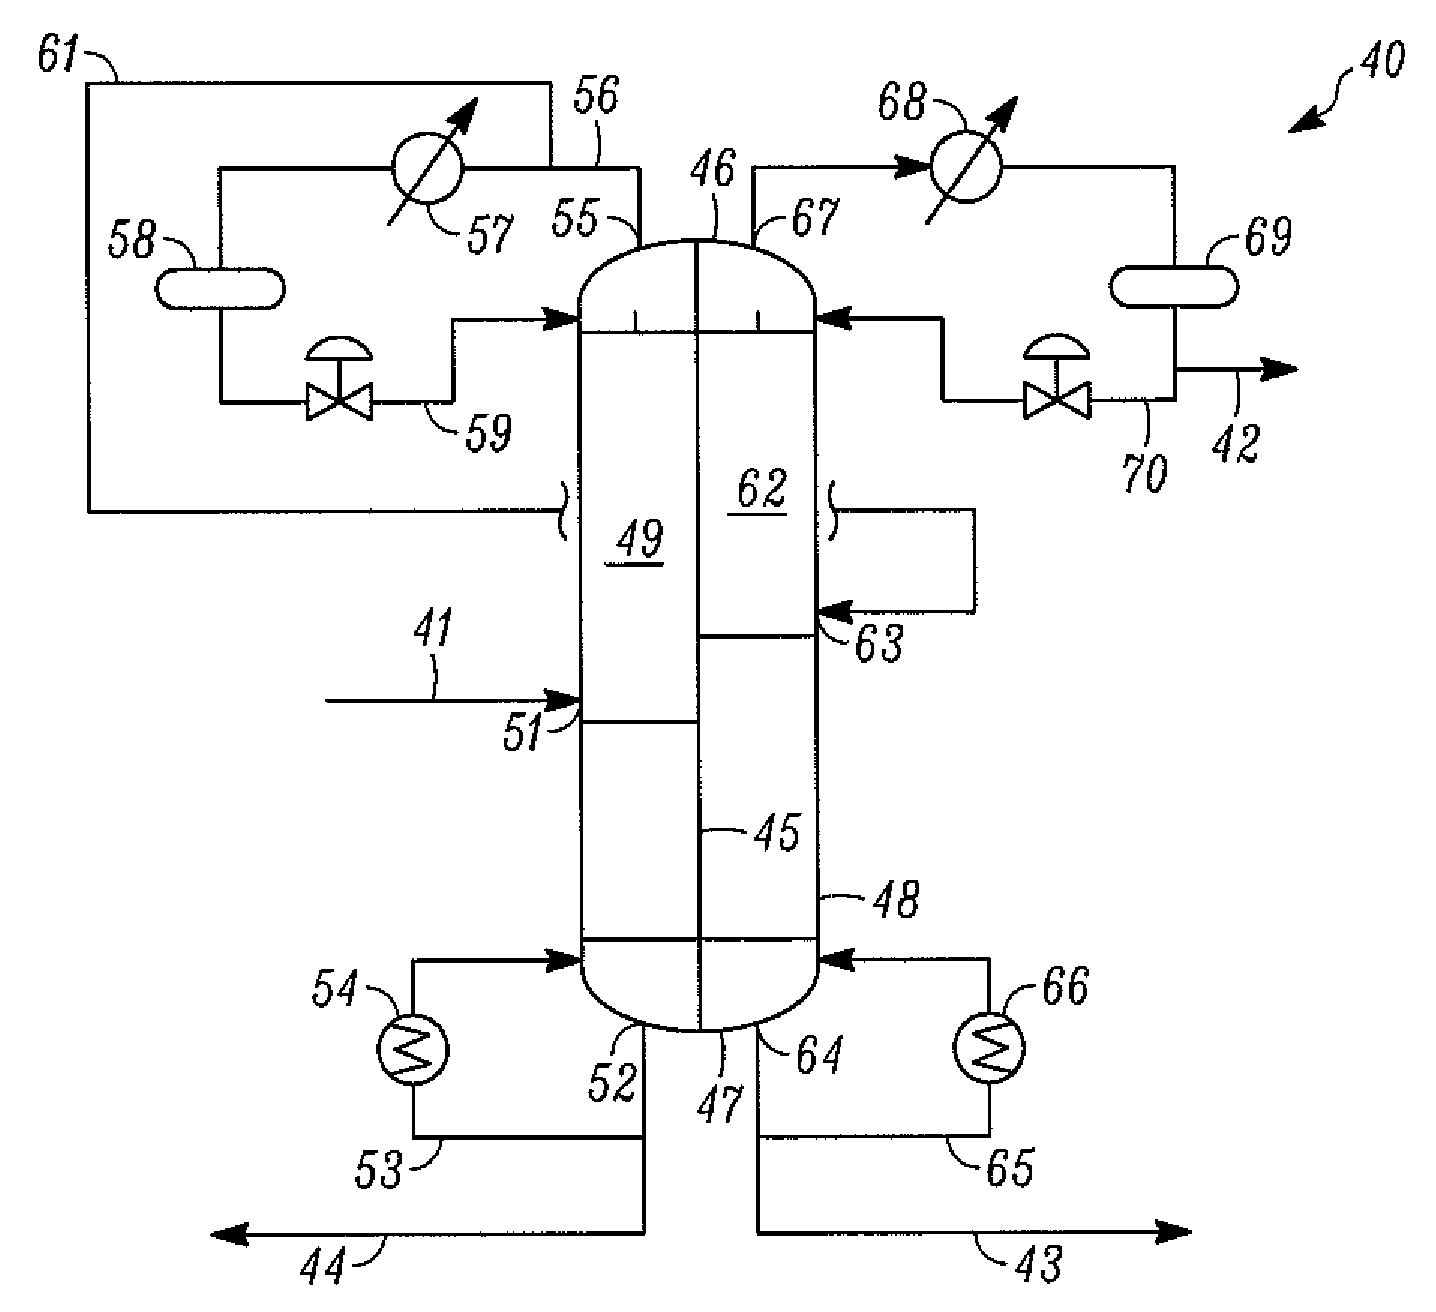 Apparatus and Methods for Separating Butene-1 from a Mixed C4 Feed